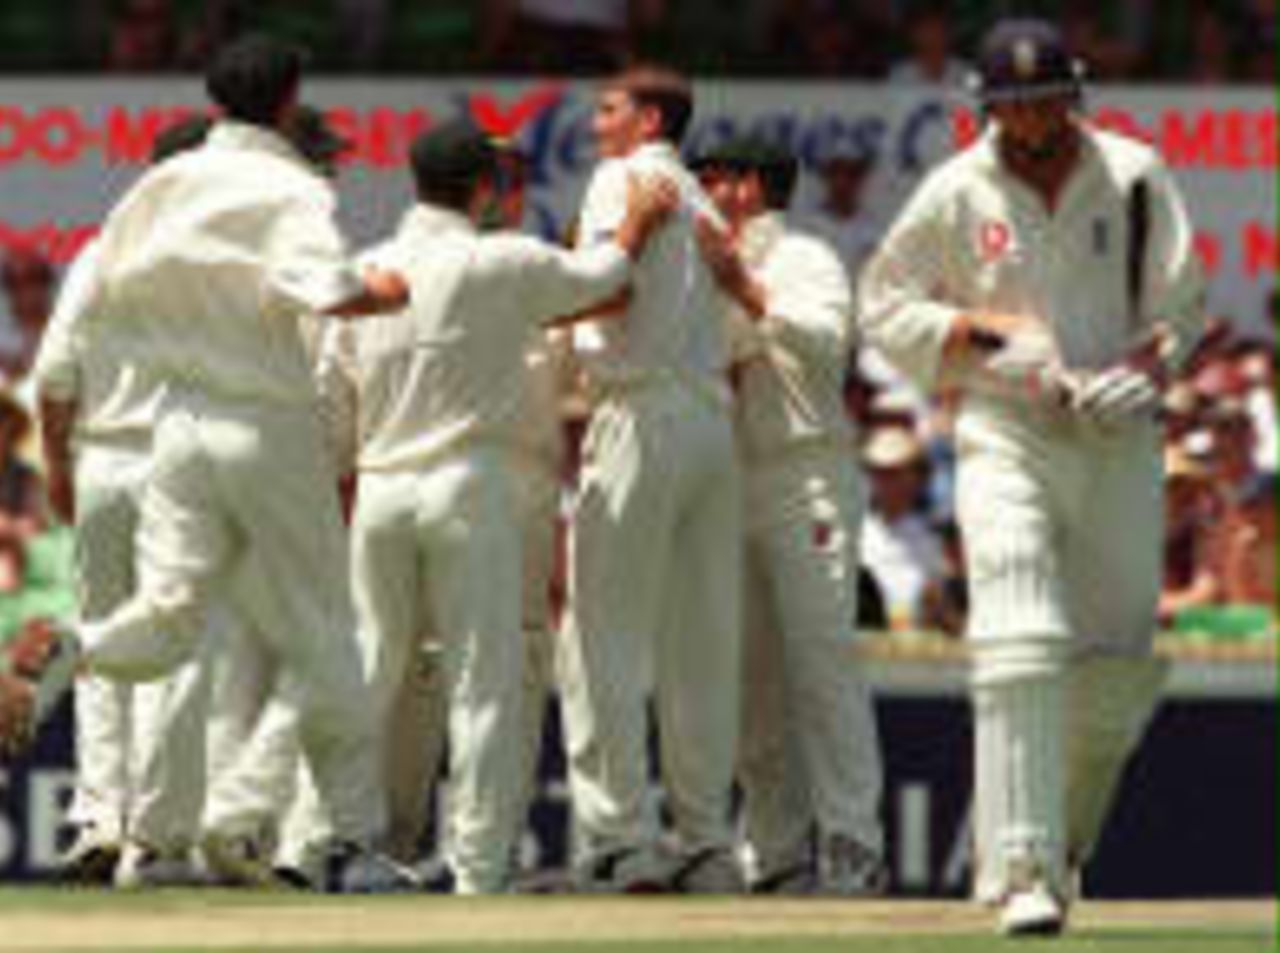 McGrath is congratulated by the Australian team after dismissing Atherton The Ashes, 1998/99, 2nd Test Australia v England WACA Ground, Perth 28 November